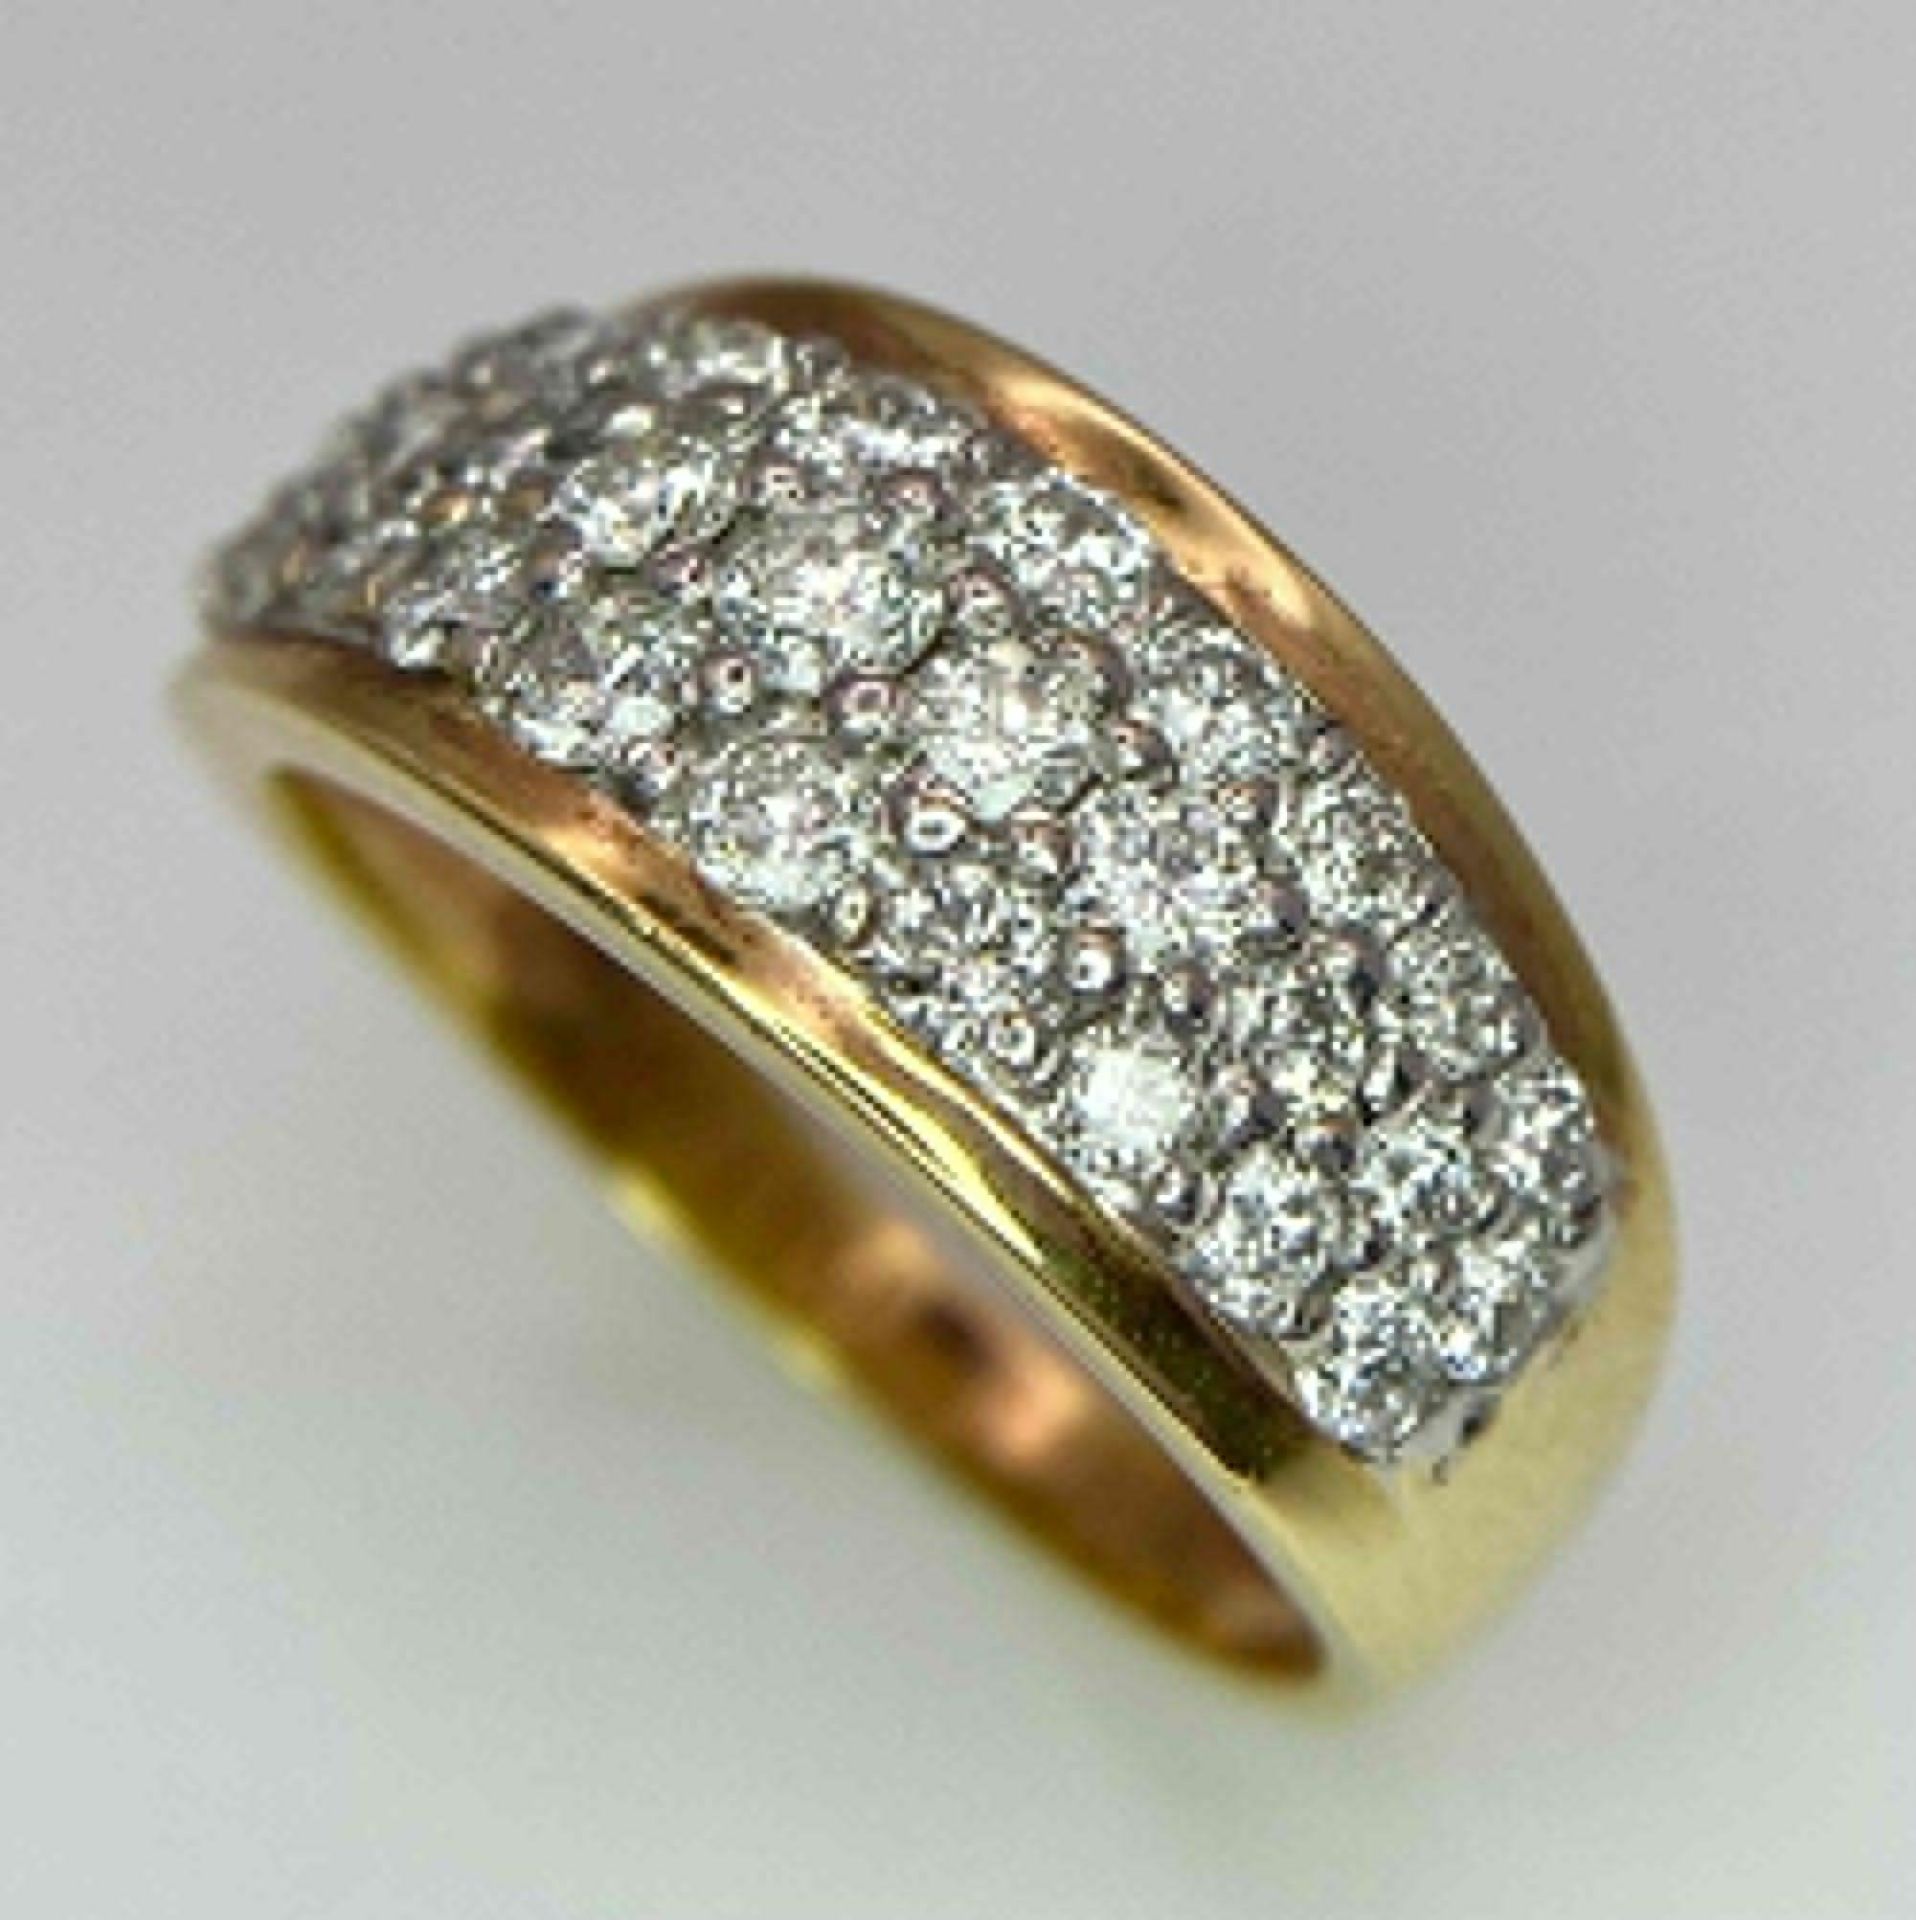 An 18K Yellow Gold Three-Row Cluster Ring. 1ctw. Size M. 5.5g total weight. - Image 5 of 15